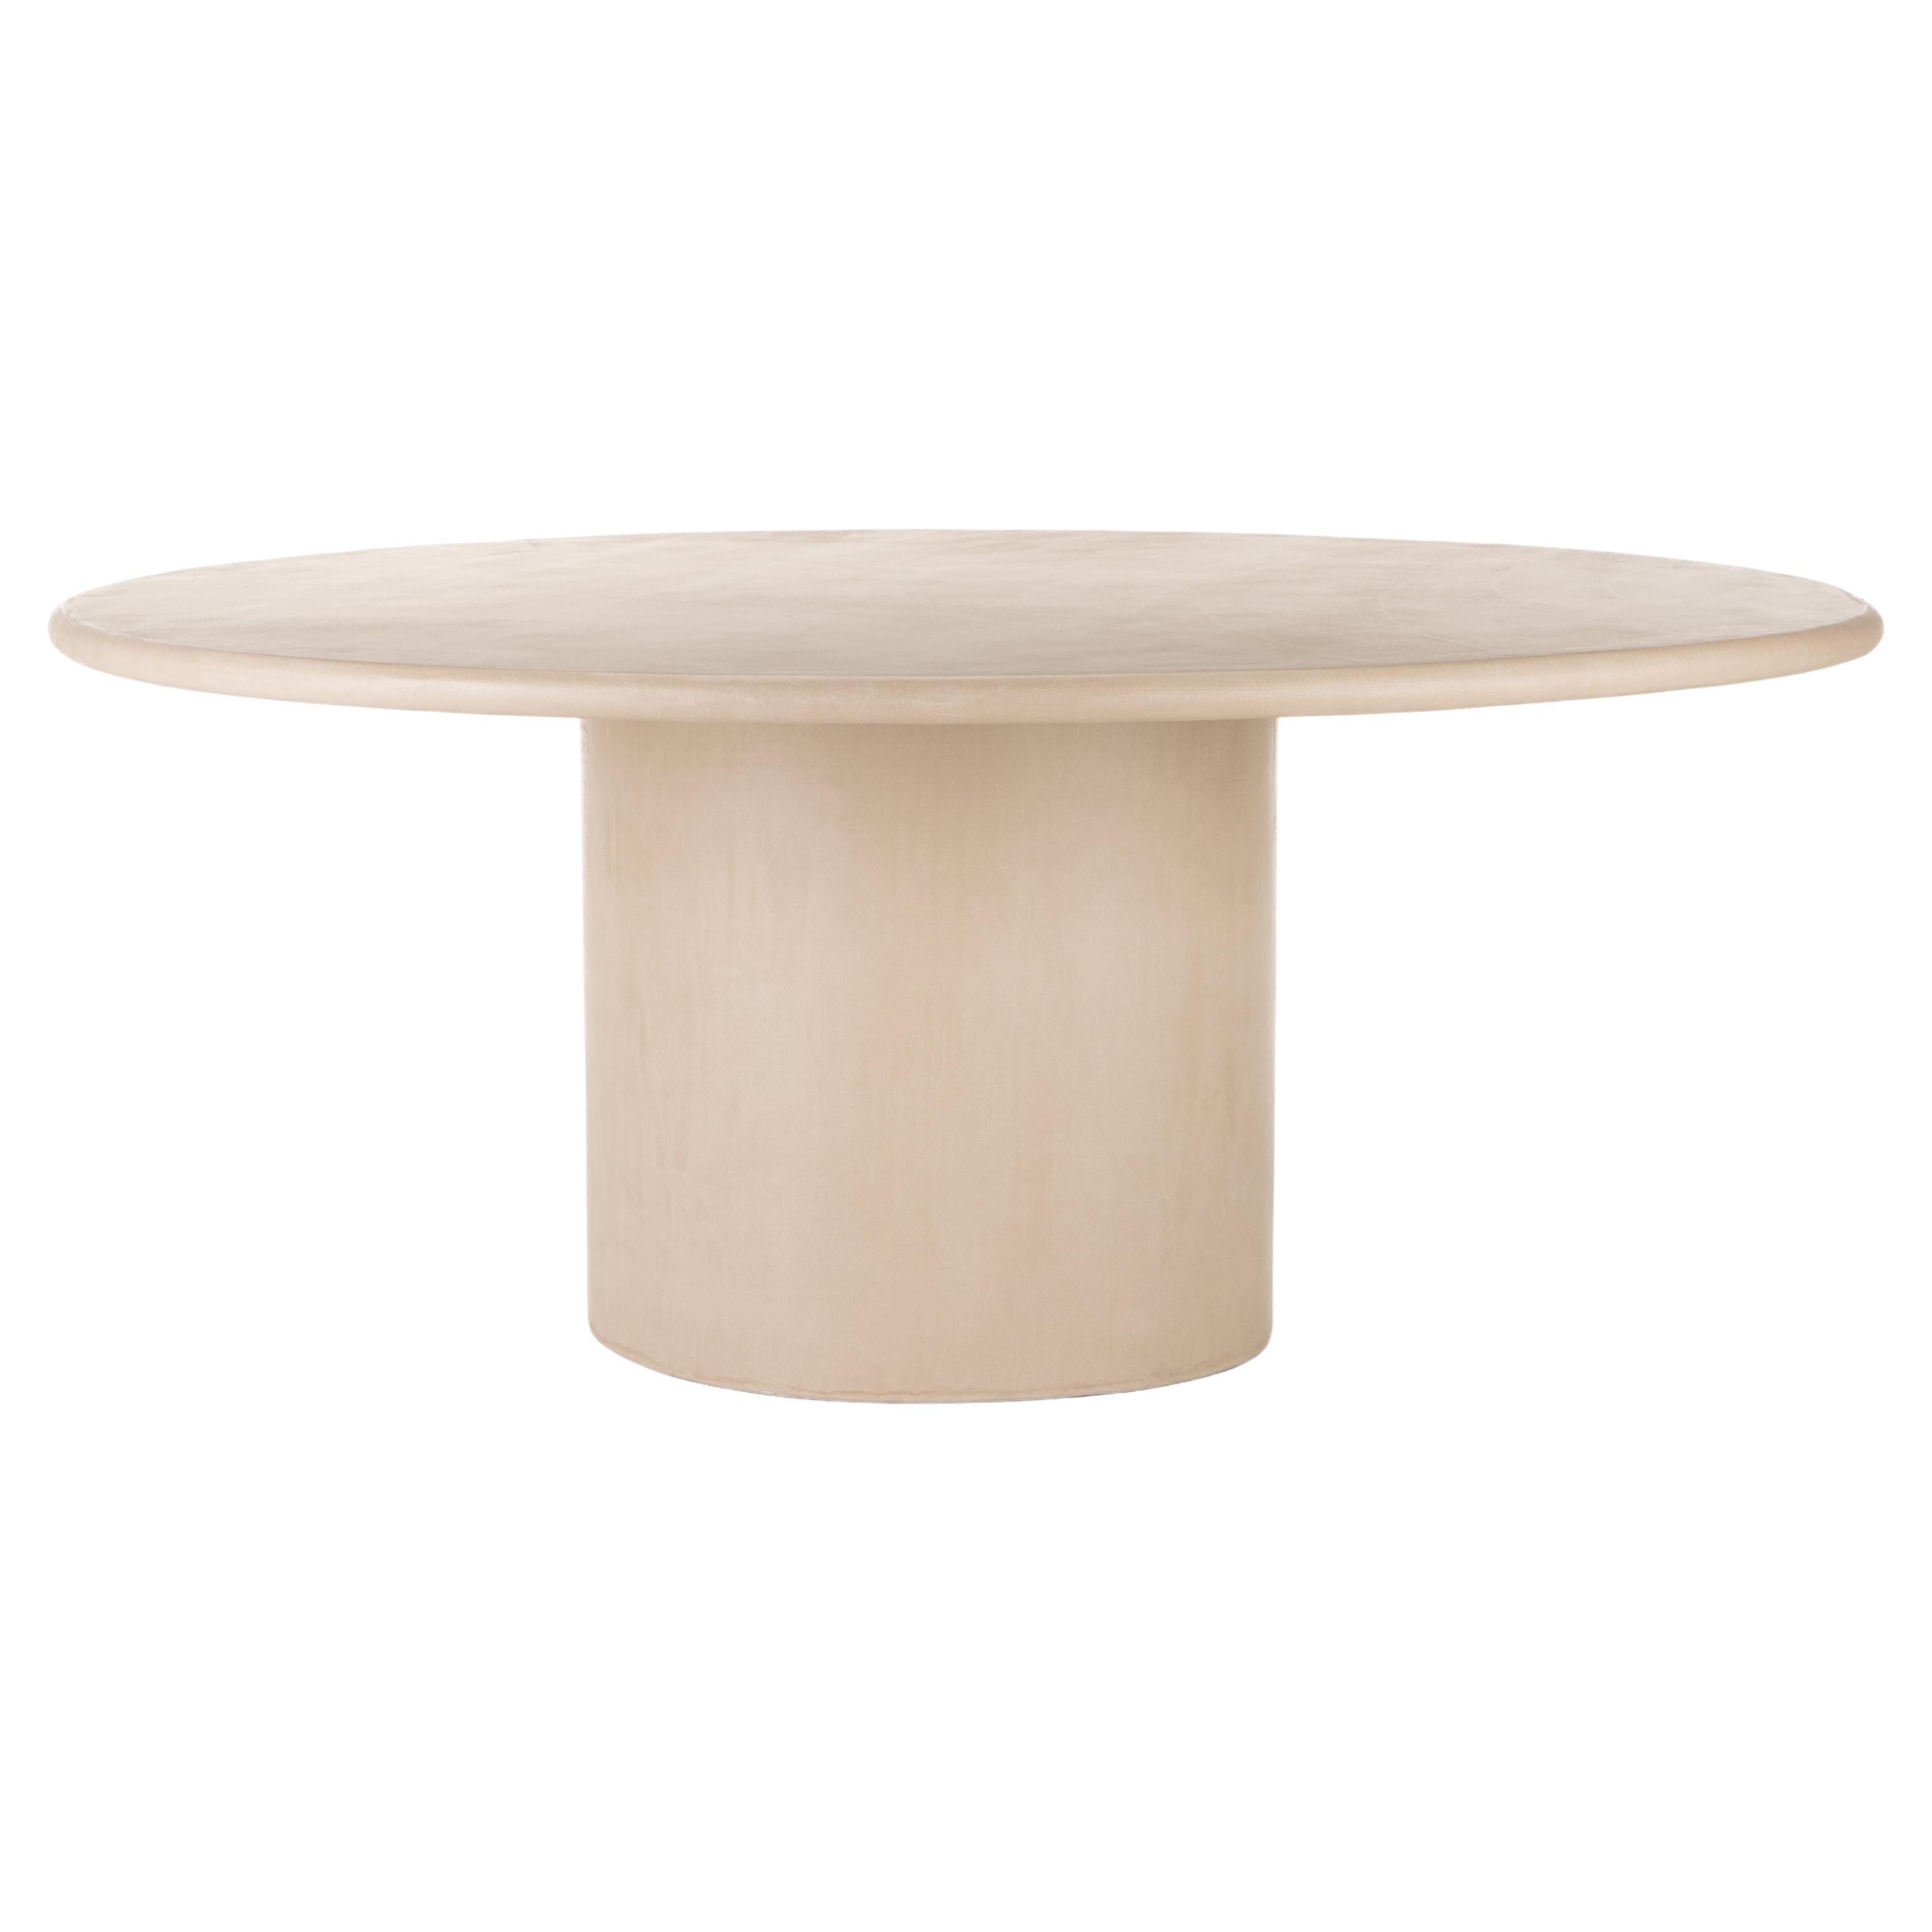 Natural Plaster Dining Table "Sami" 150 by Isabelle Beaumont